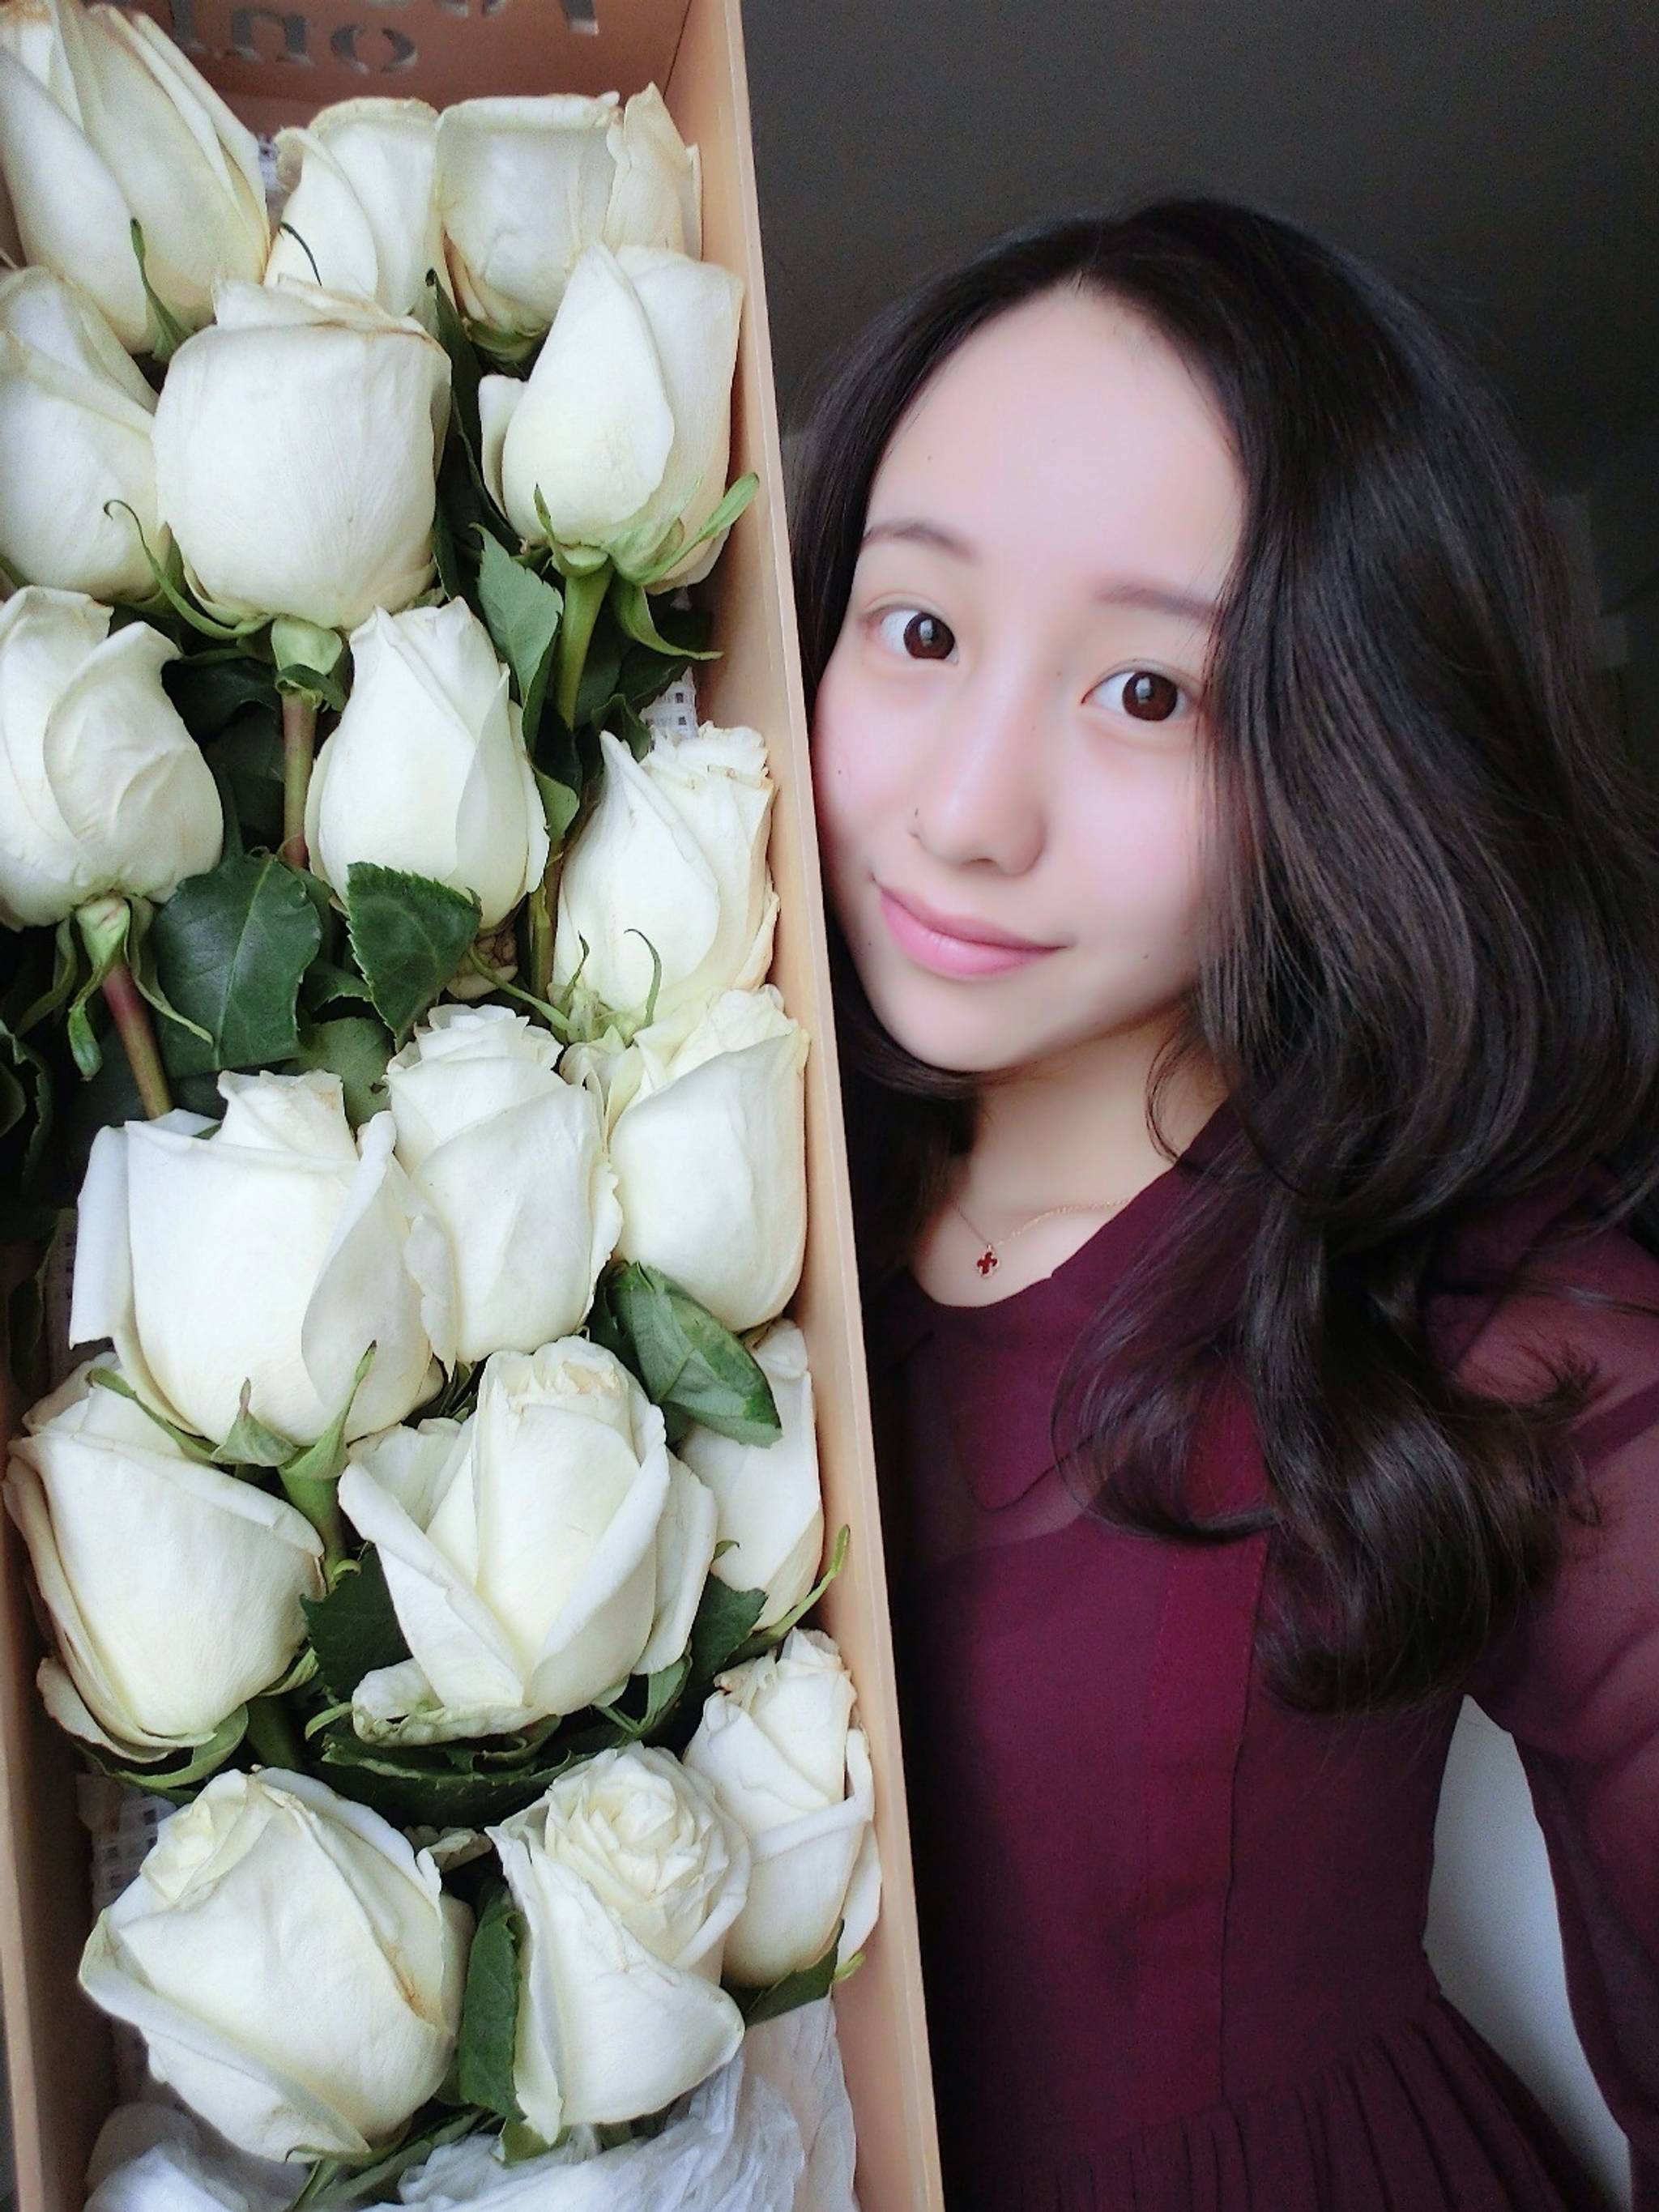 This Chinese flower shop is worth $100m